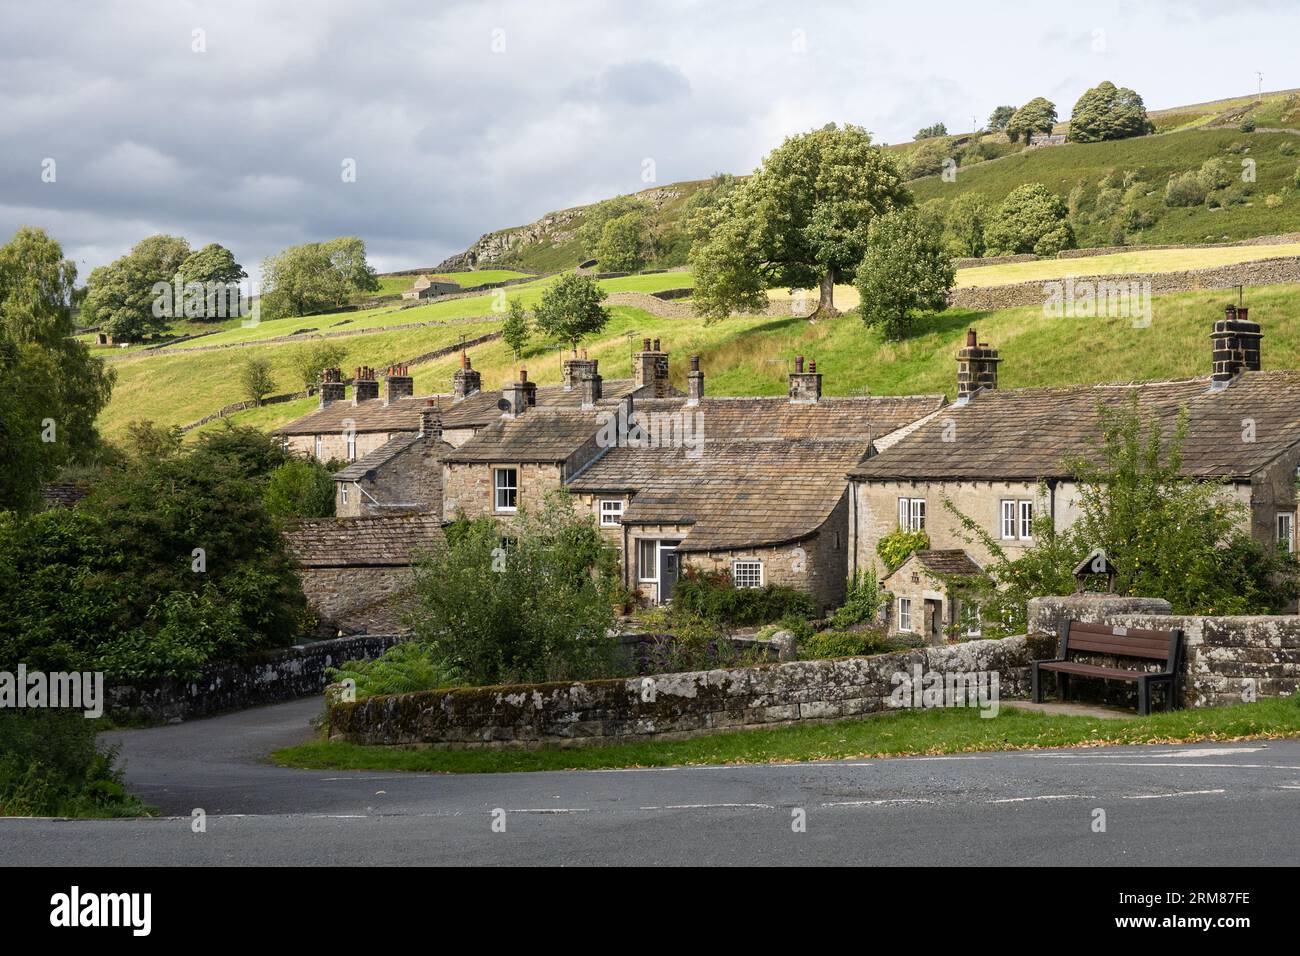 Hebden near Grassington, a historic village in Lower Wharfedale, Yorkshire Dales, England, UK Stock Photo